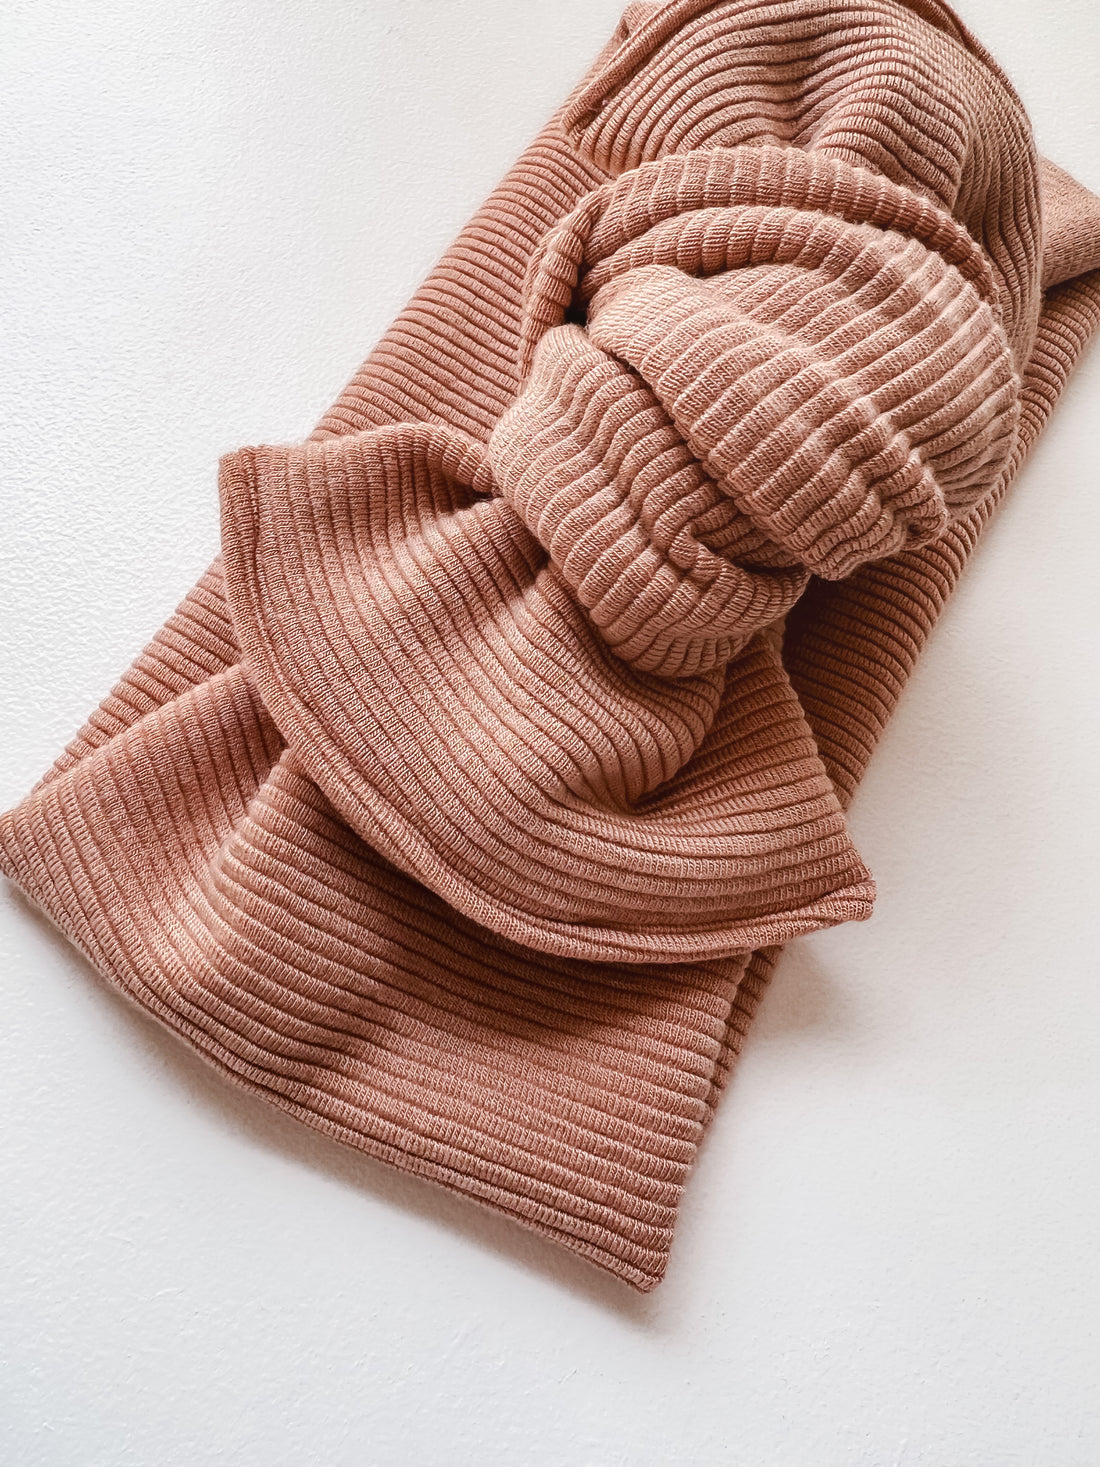 Apricot Baby Head Wrap | Ribbed Knot Bow - EllaLaine